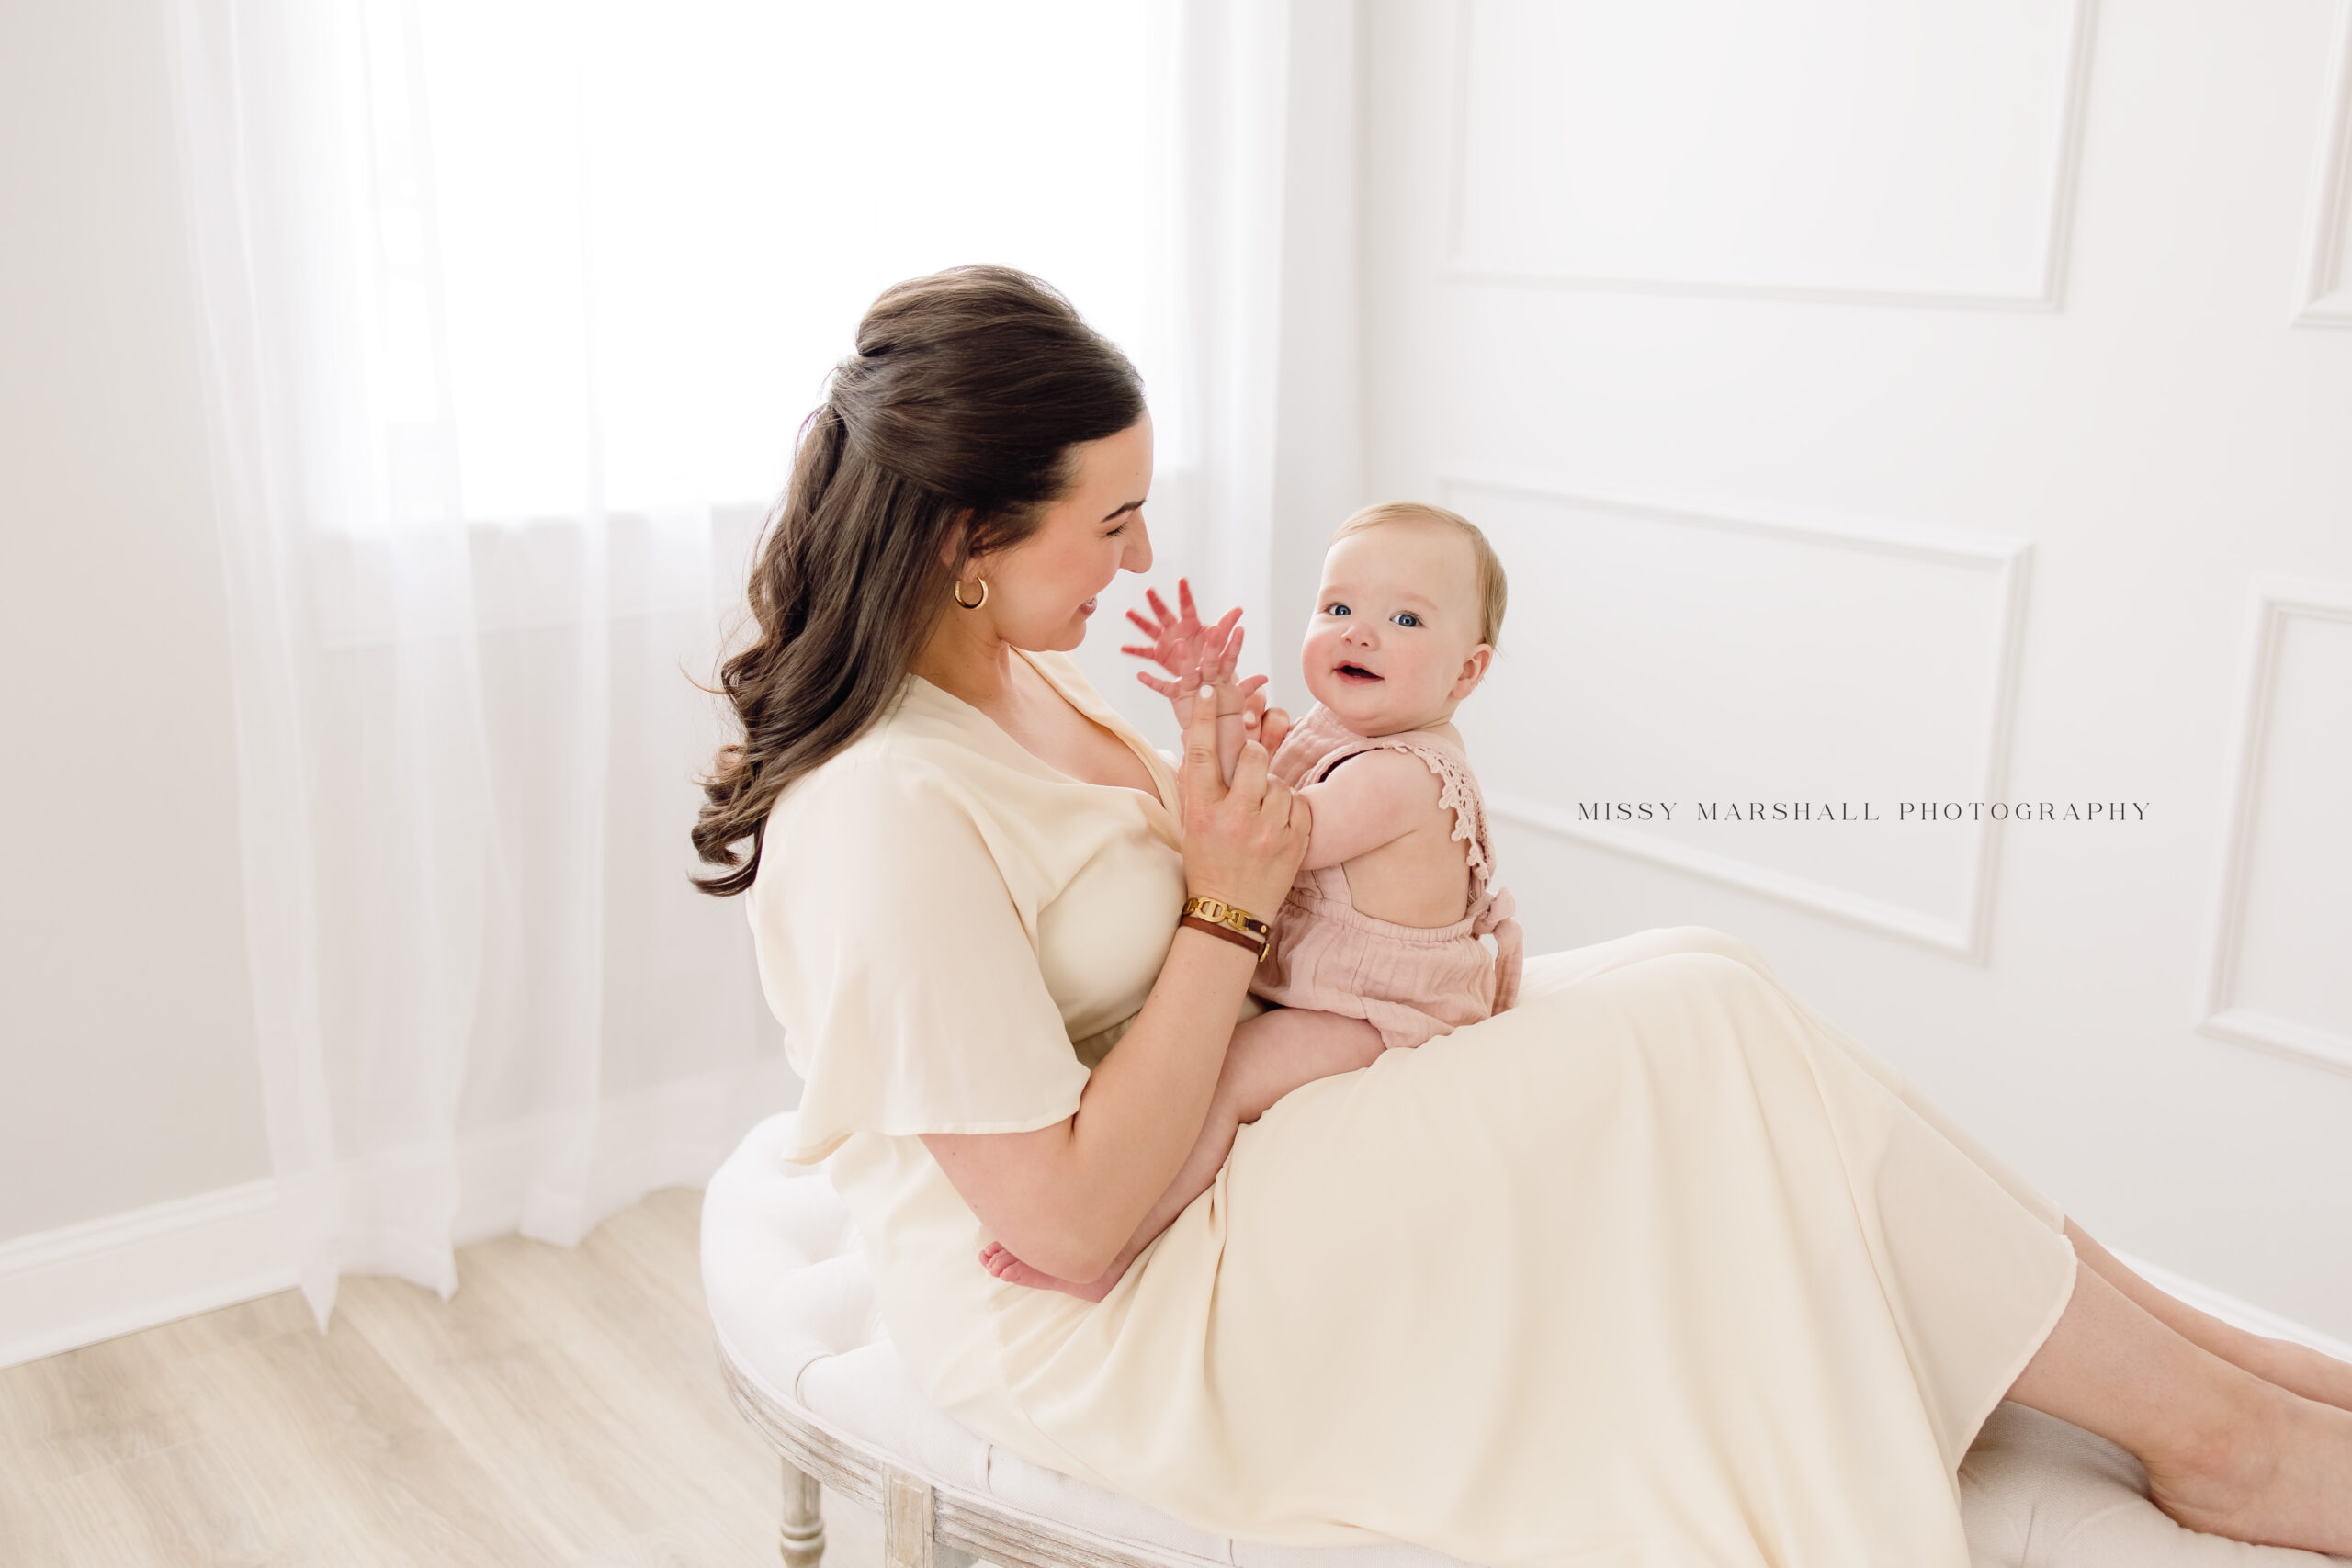 One year old baby girl sitting on her mom's lap clapping her hands and smiling at her first birthday milestone session